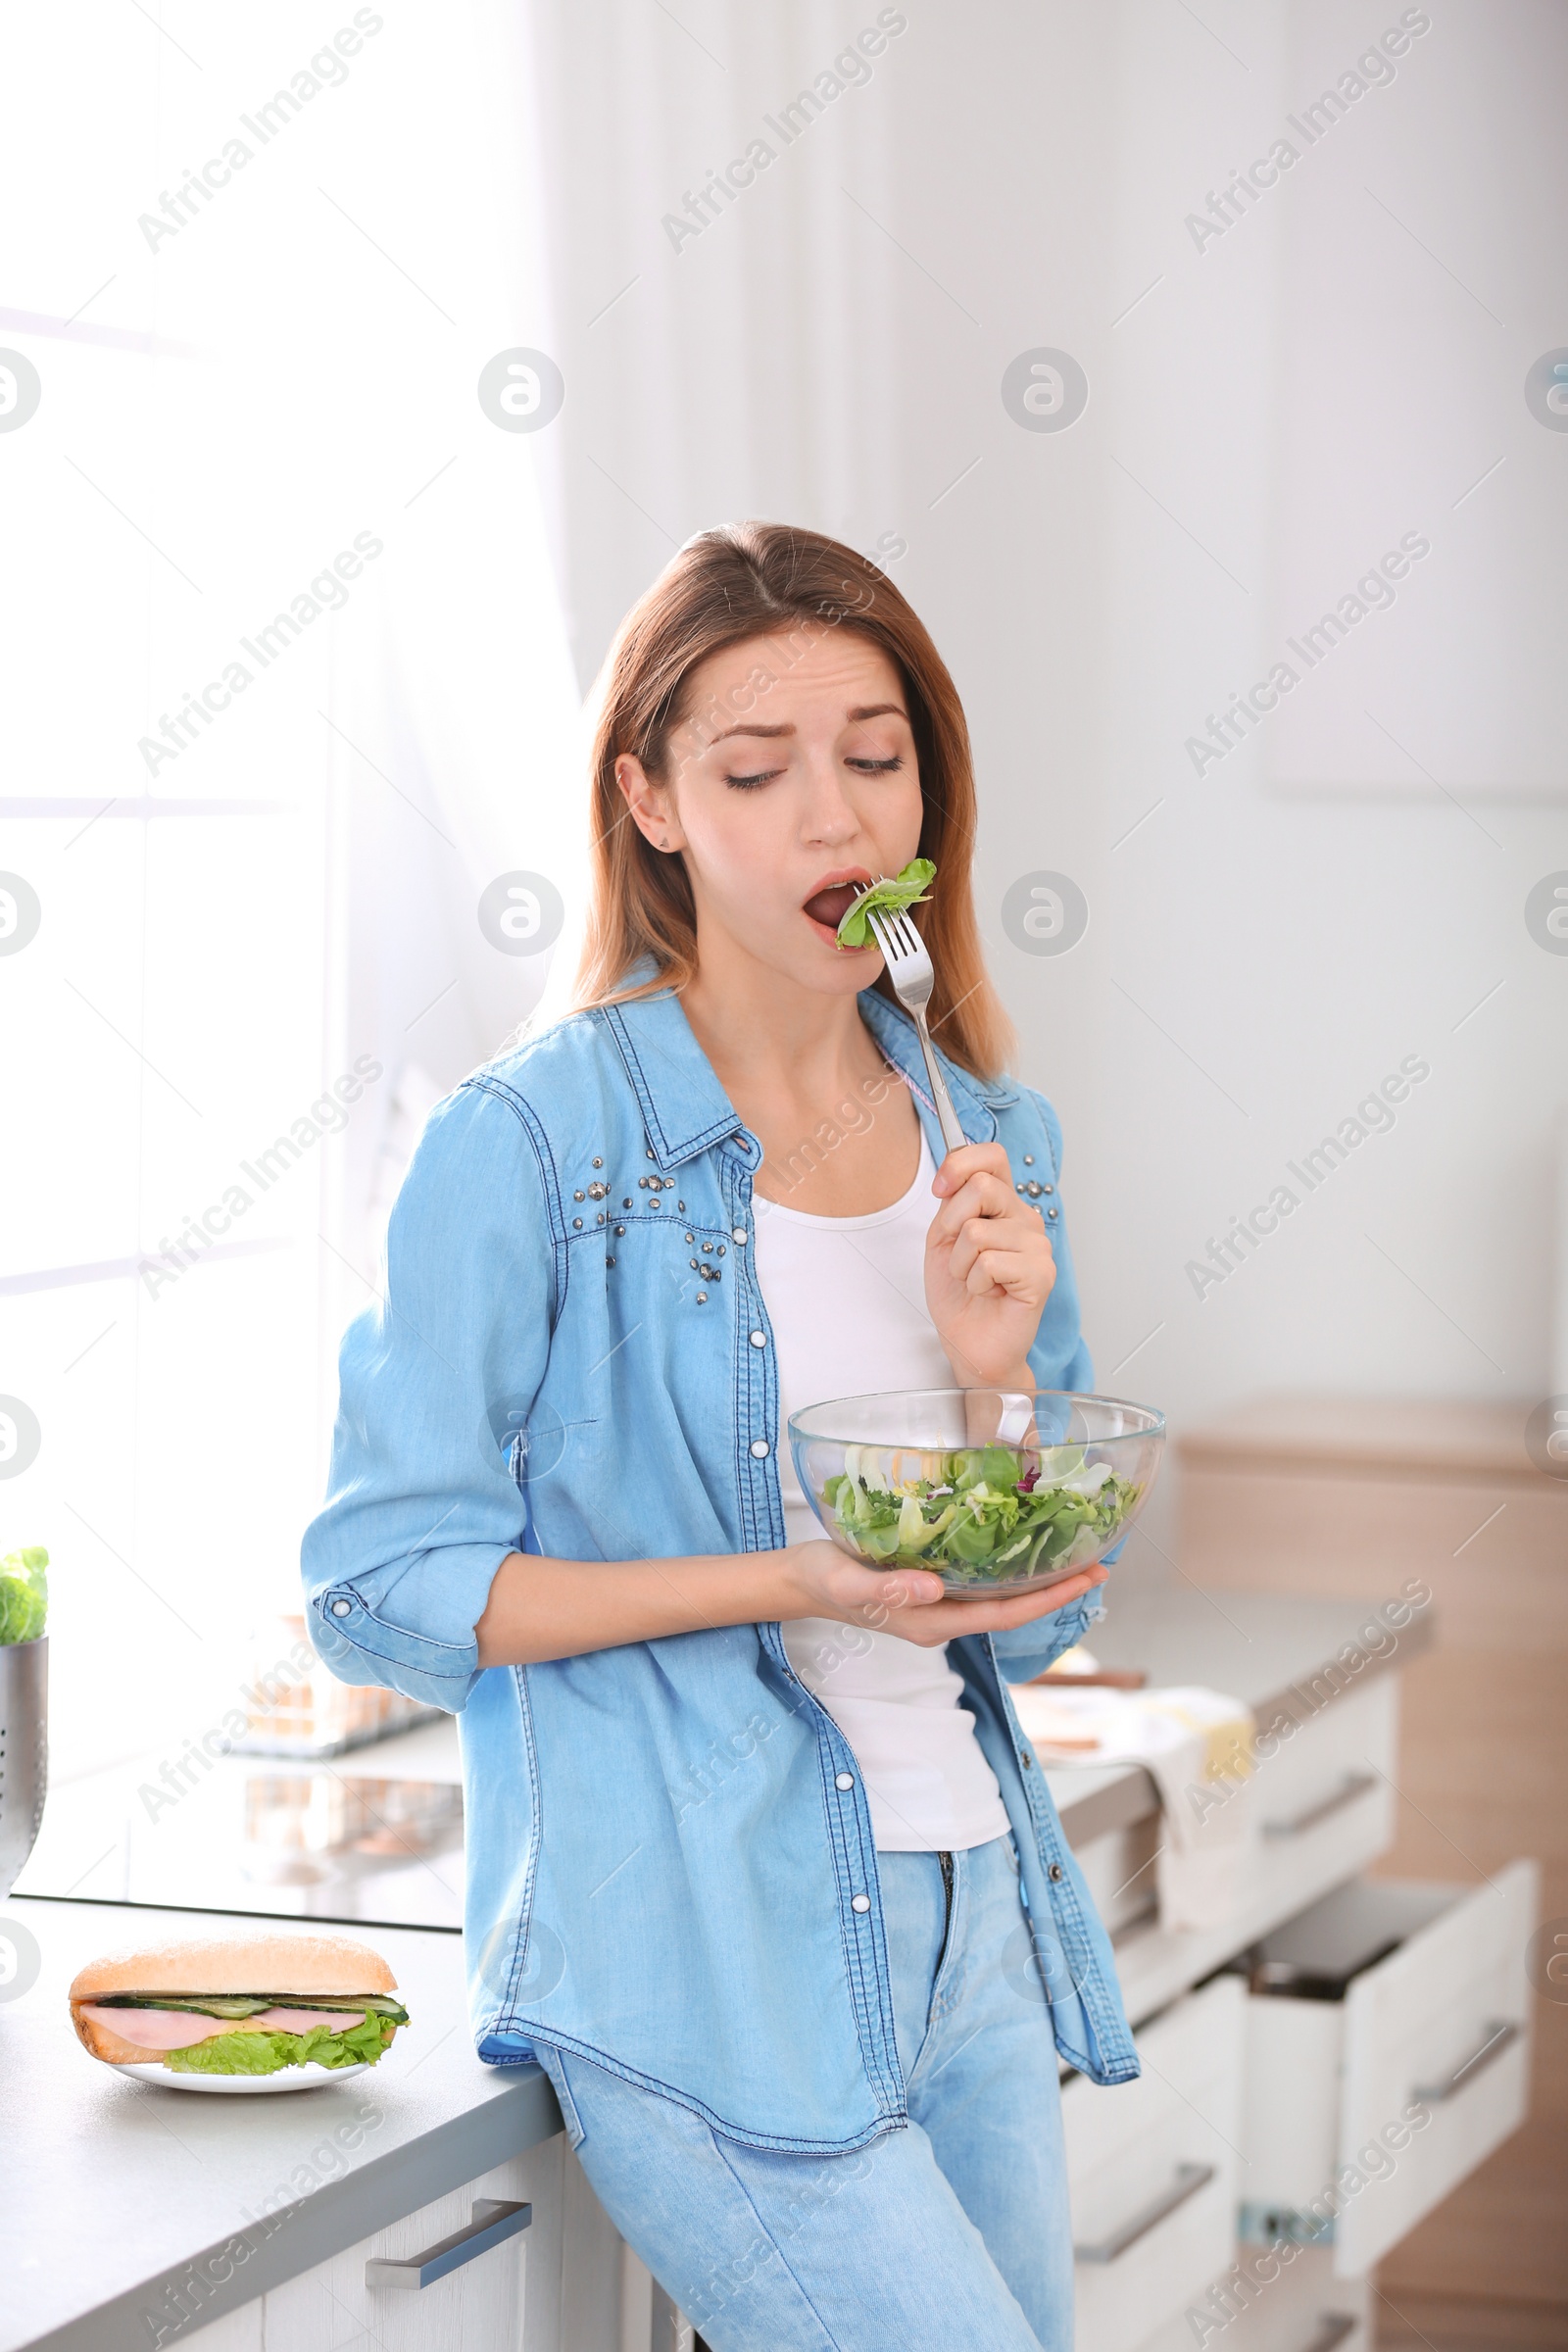 Photo of Emotional young woman eating salad instead of sandwich in kitchen. Healthy diet